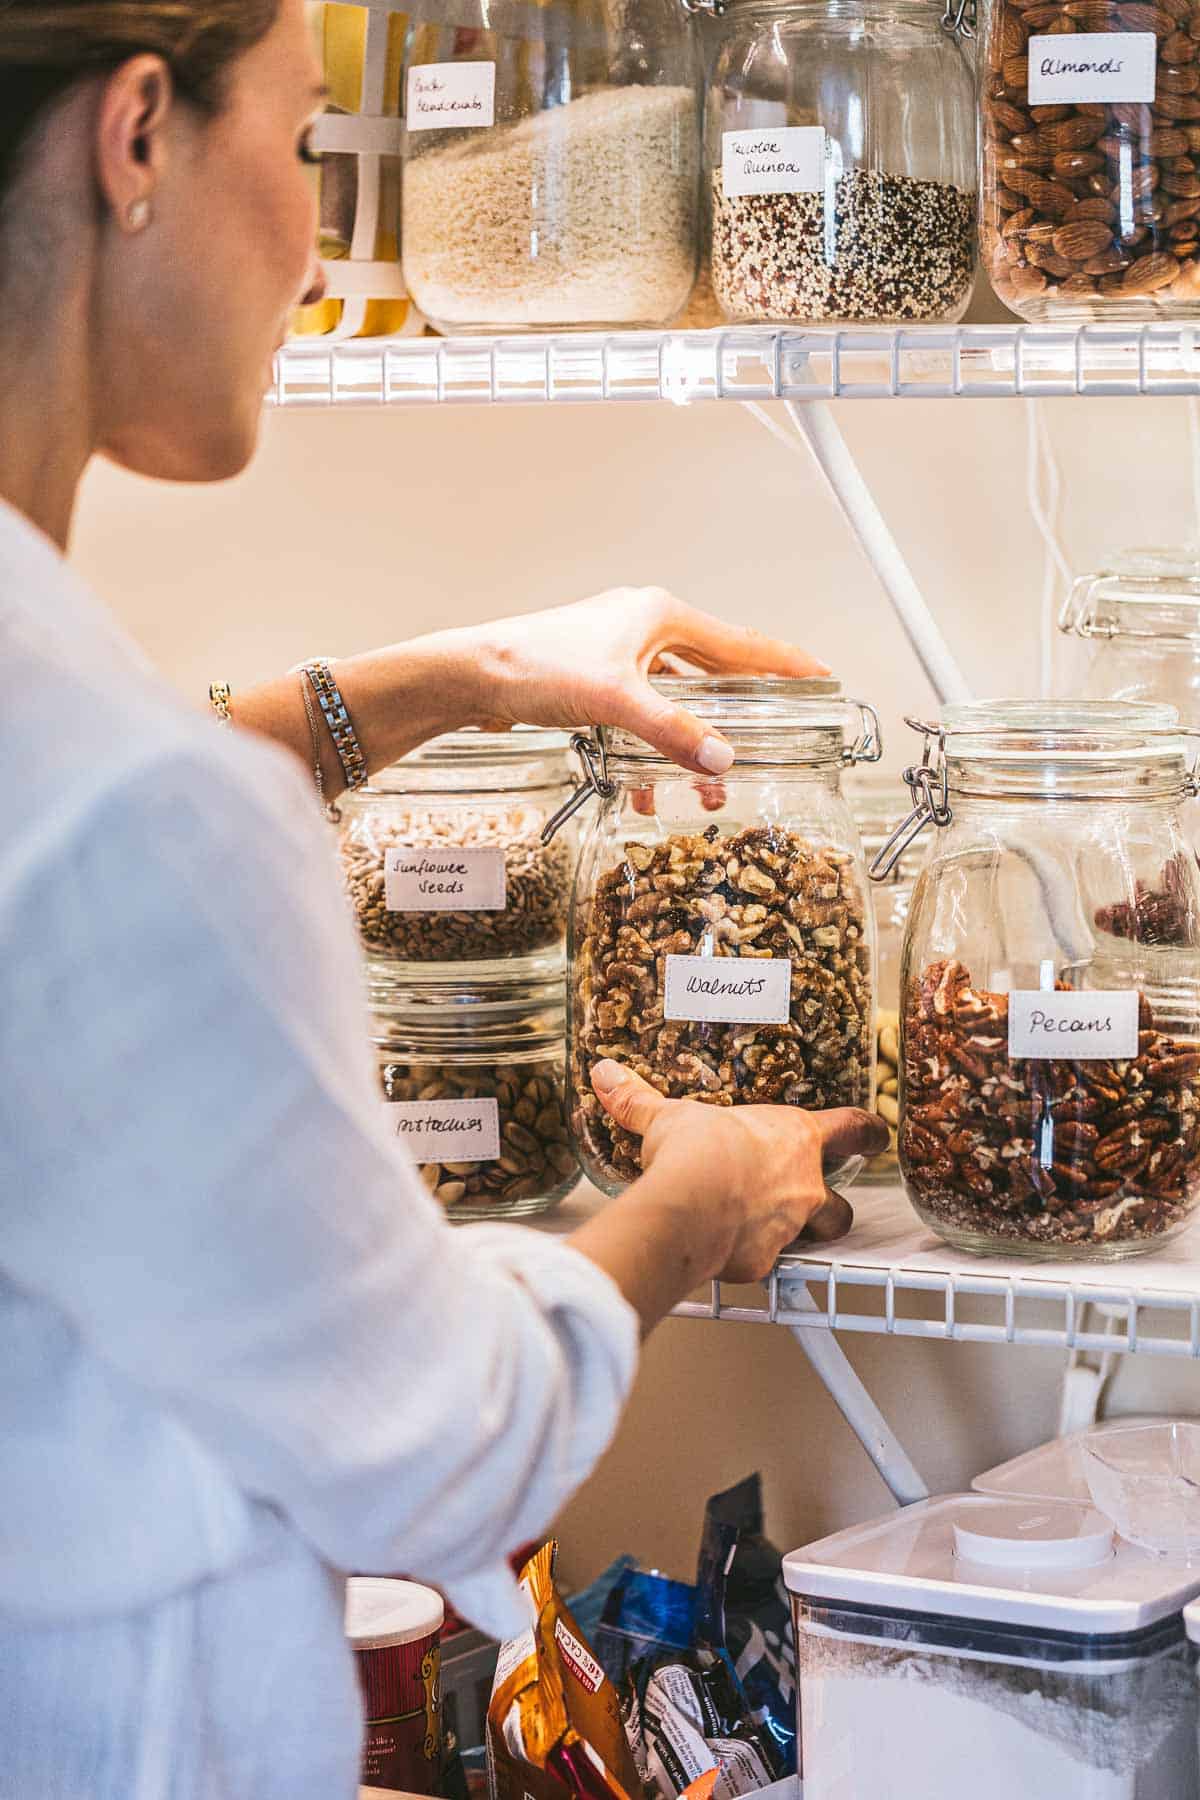 A woman is putting a jar of nuts in the pantry.